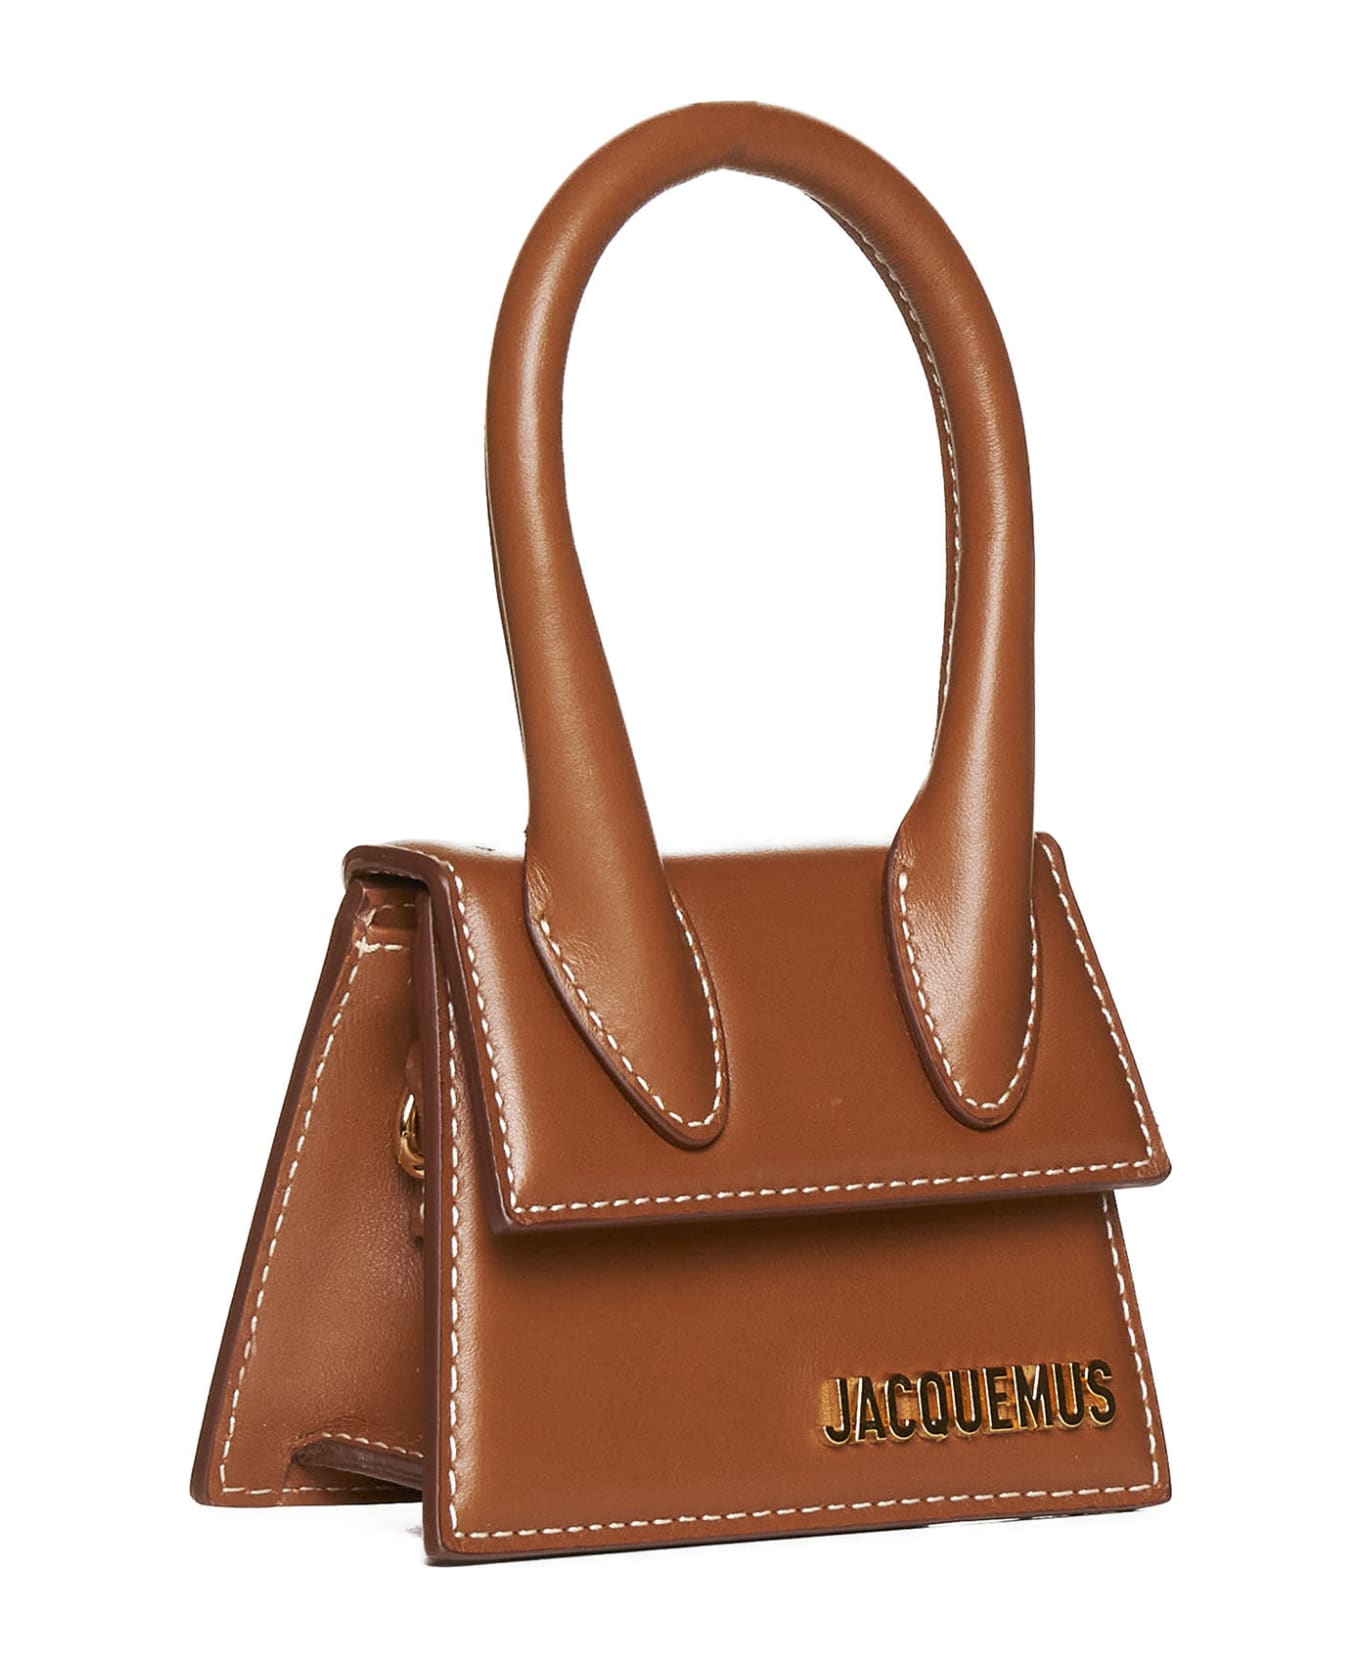 Jacquemus Le Chiquito Leather Mini Bag - Light brown トートバッグ